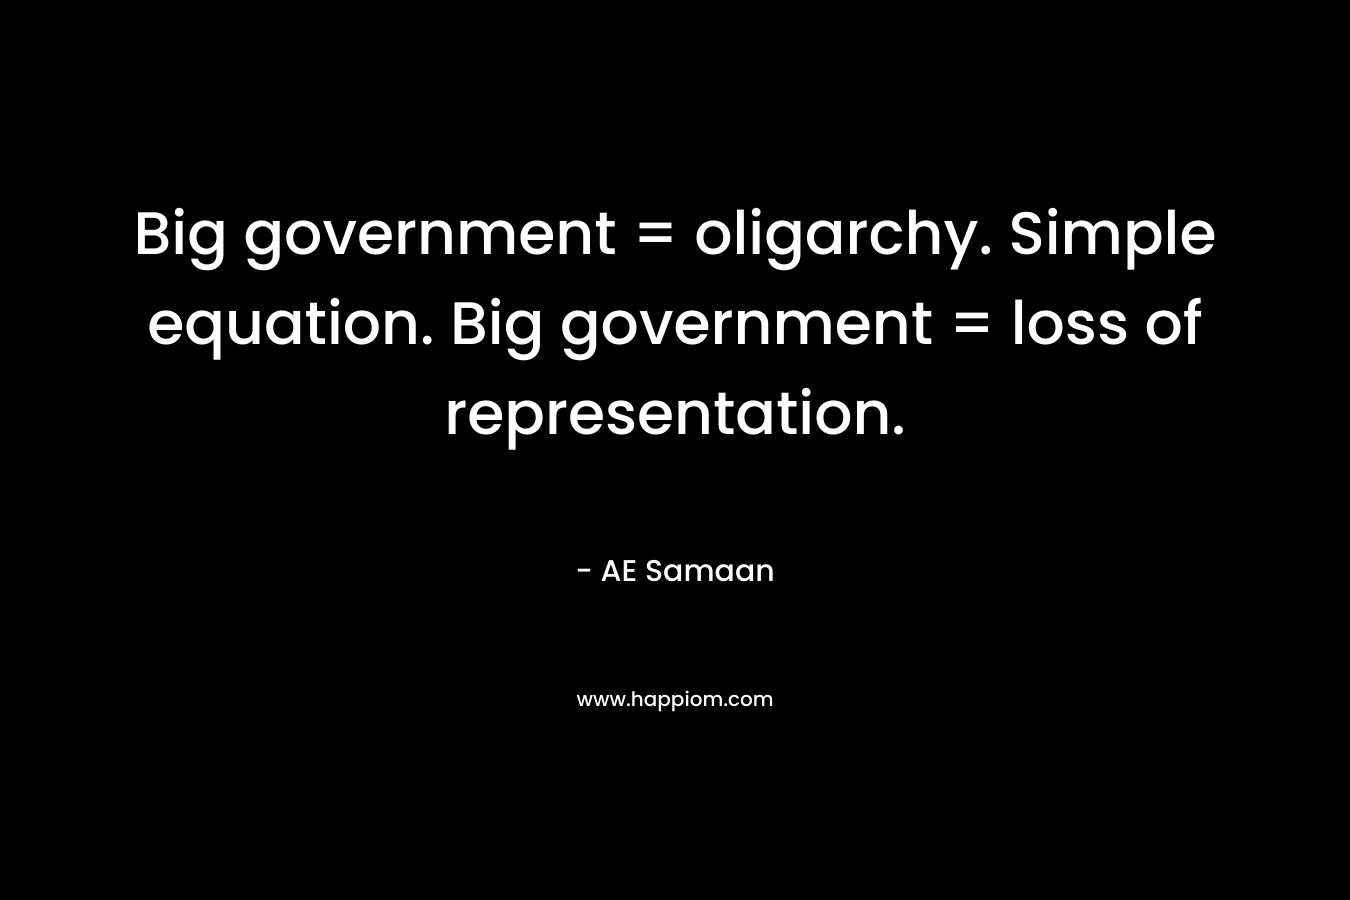 Big government = oligarchy. Simple equation. Big government = loss of representation.